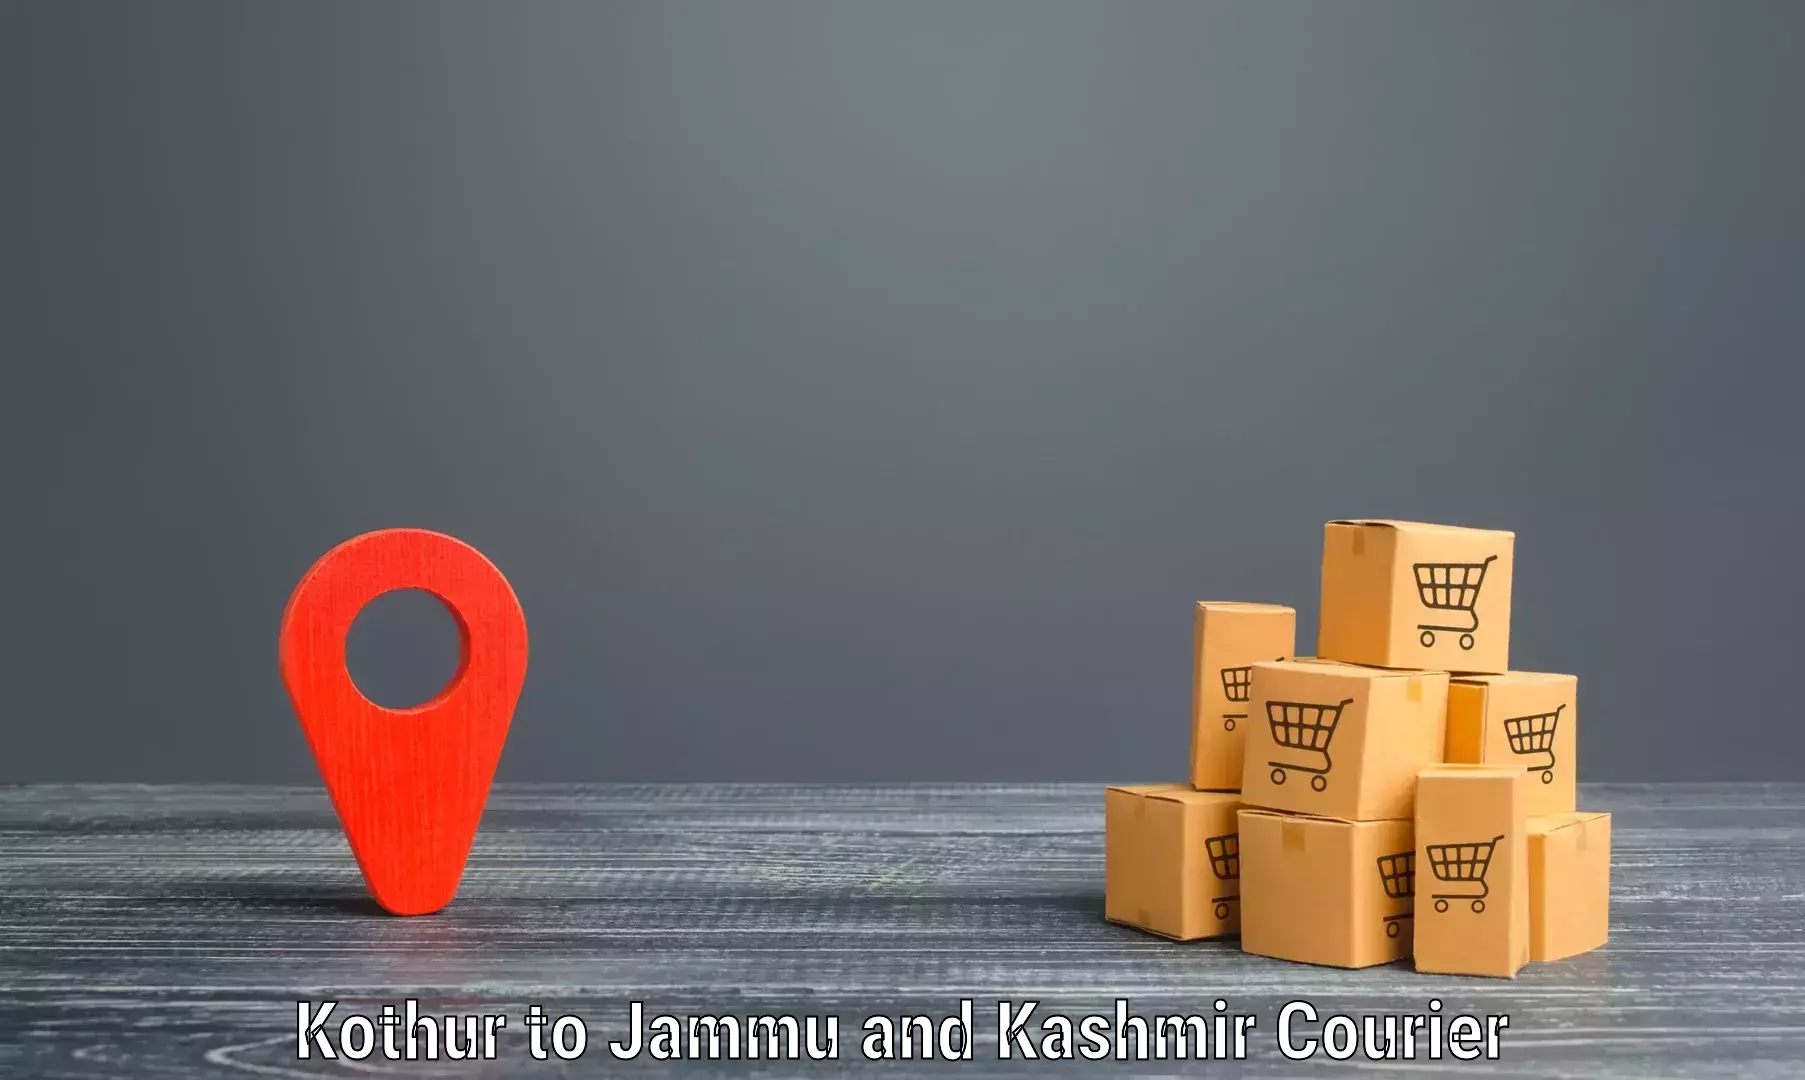 Shipping and handling Kothur to Pulwama